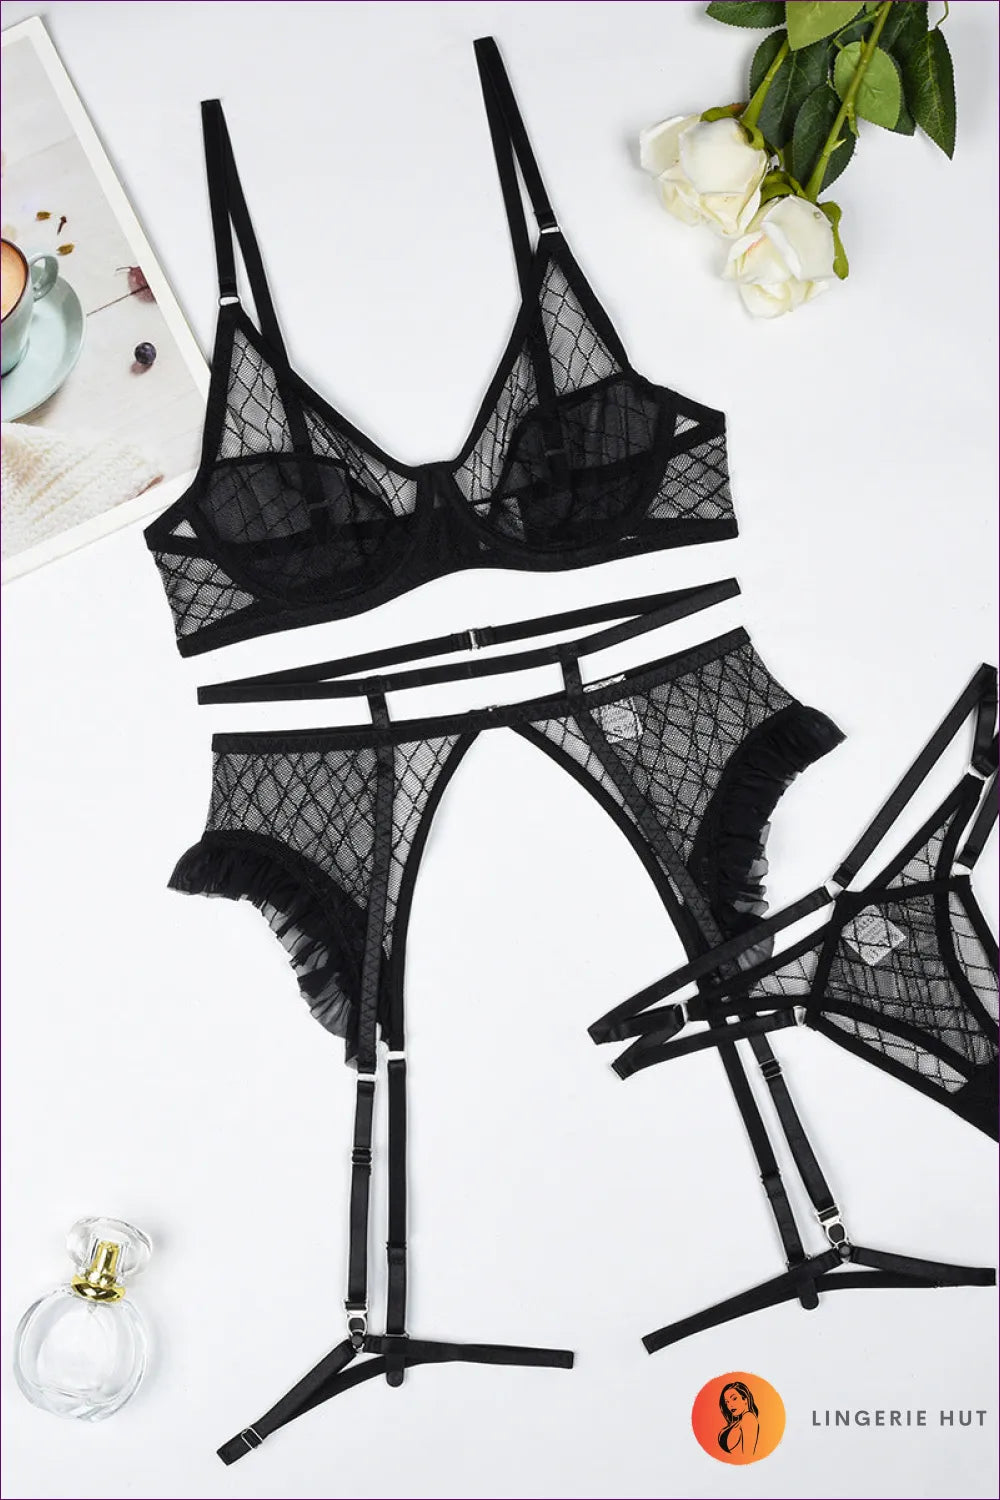 🌟 Elevate Your Lingerie Game With The Mesh Magic 4-piece Bra Set. Featuring a Sensual Mesh Design Intricate